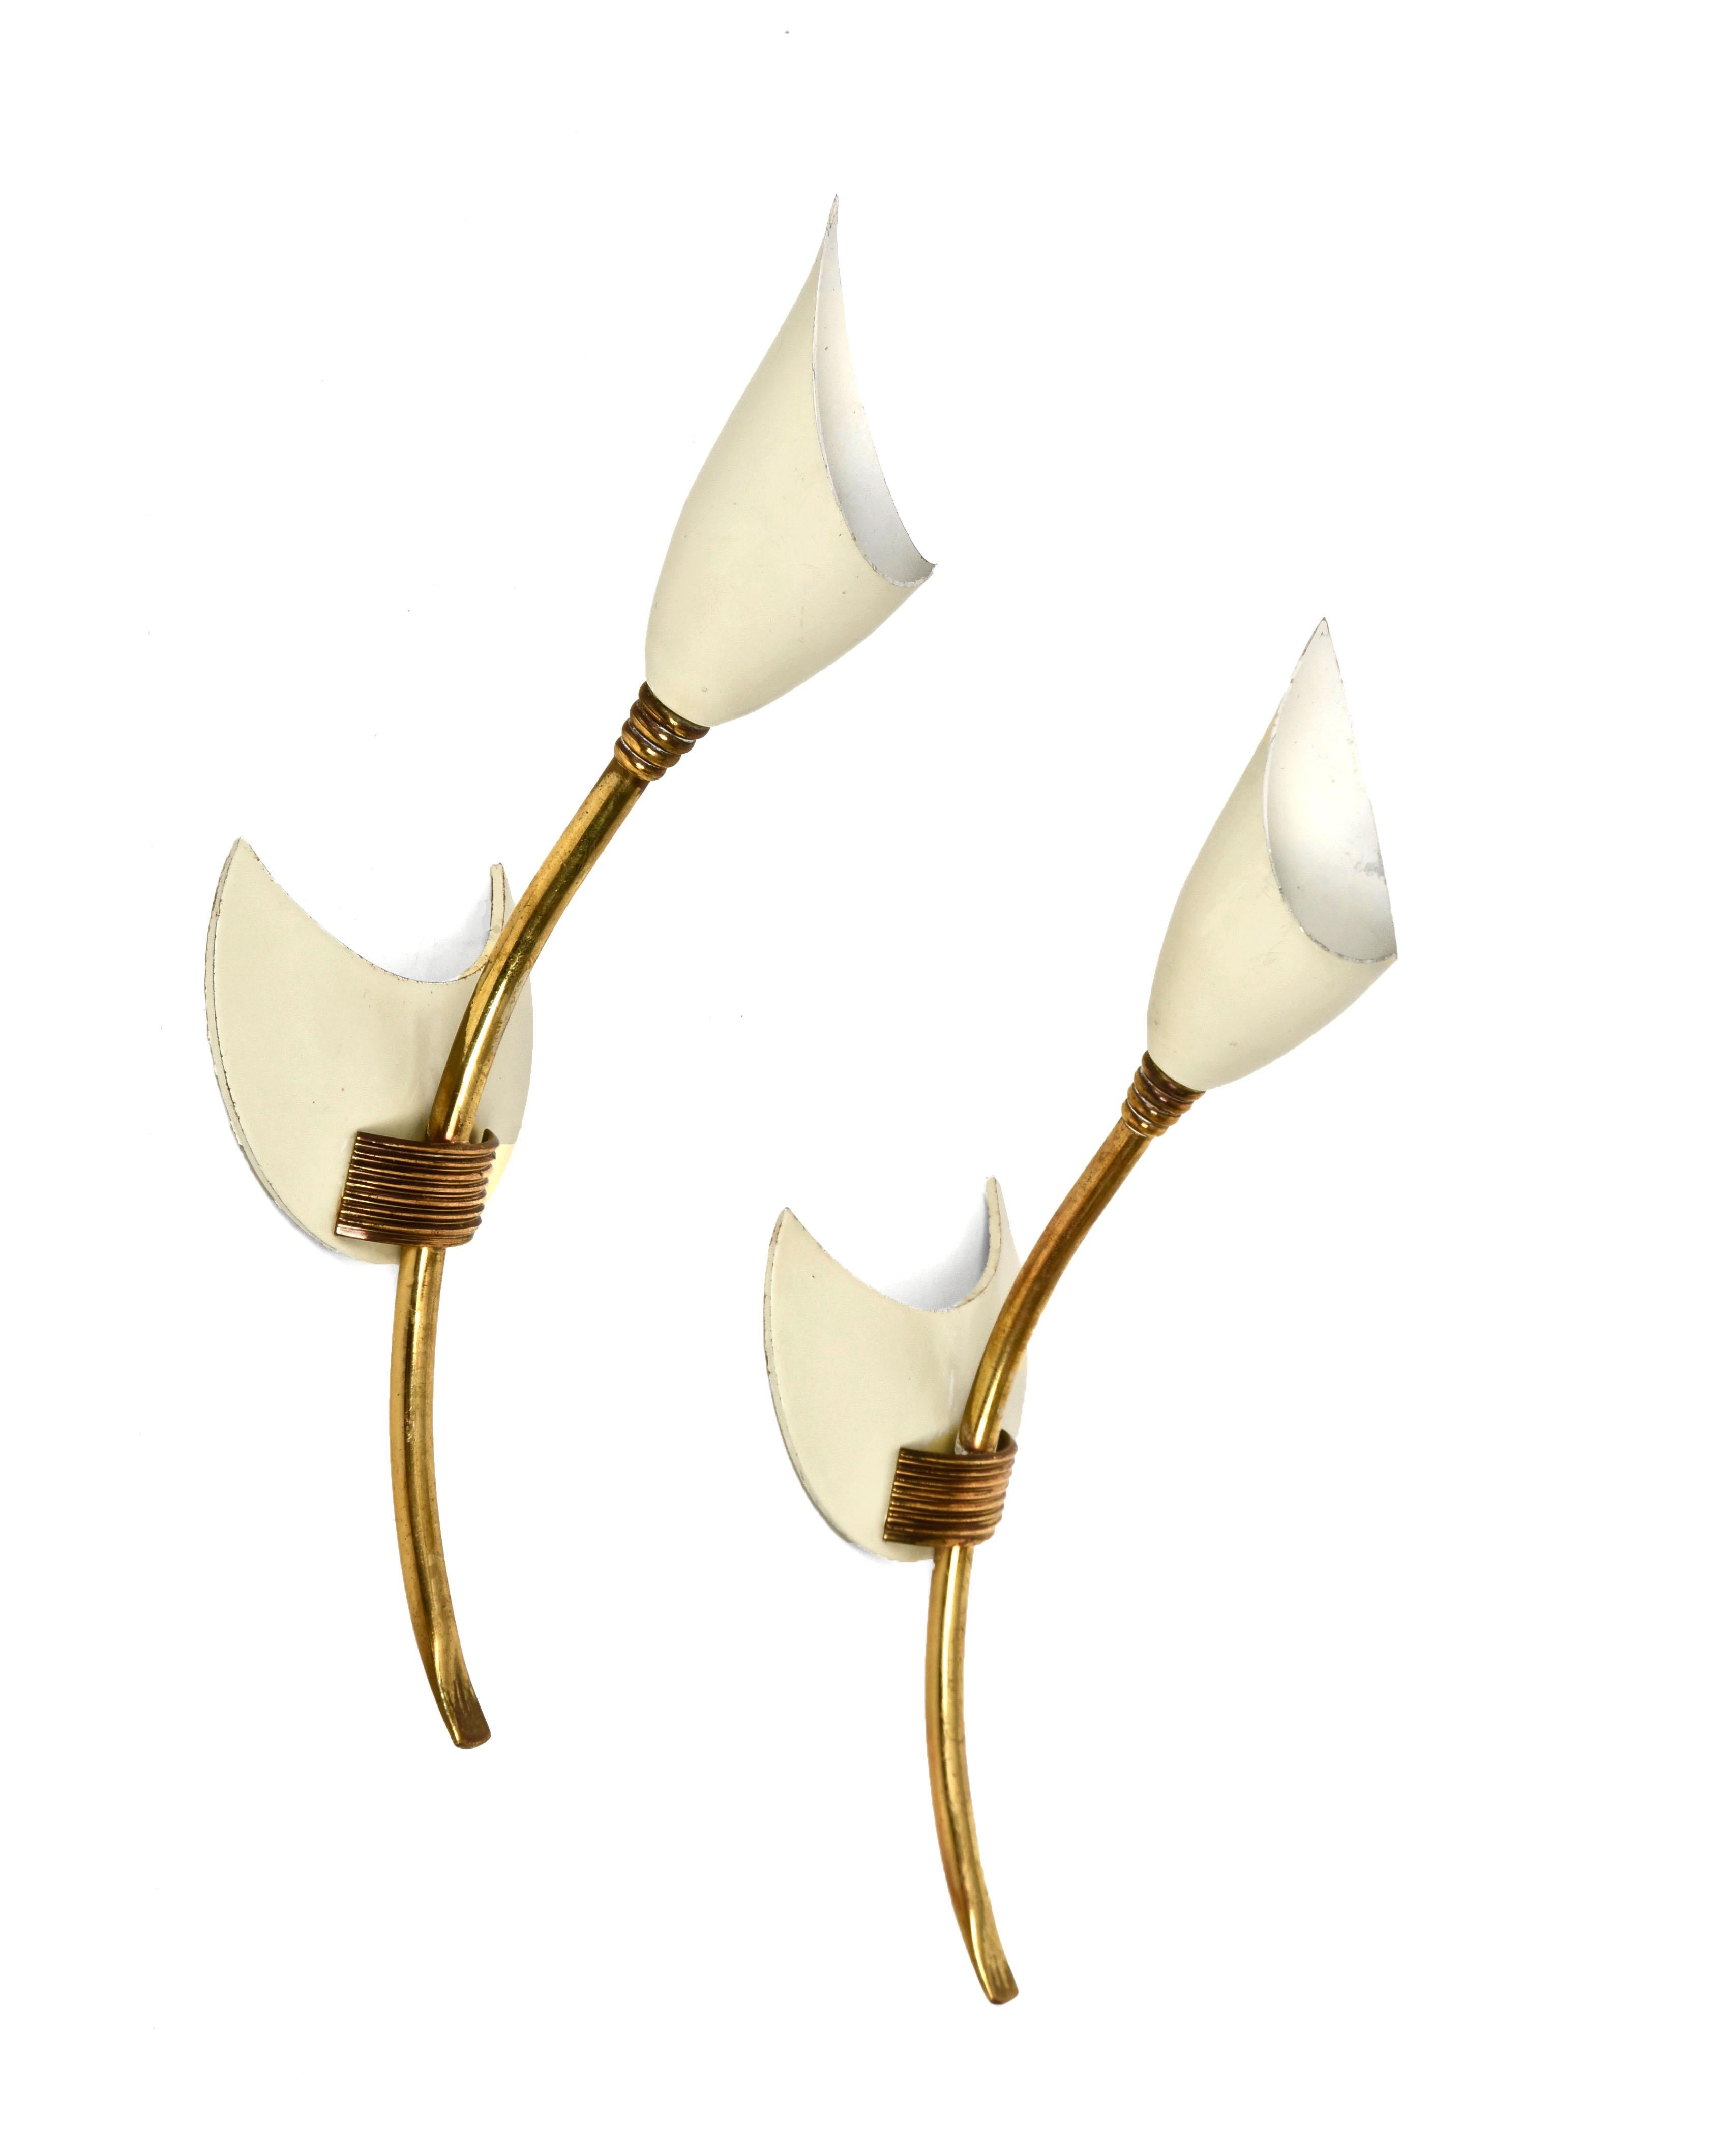 Pair of GCME Midcentury Brass and Enamelled Aluminum Italian Tulip Sconces 1950s For Sale 5